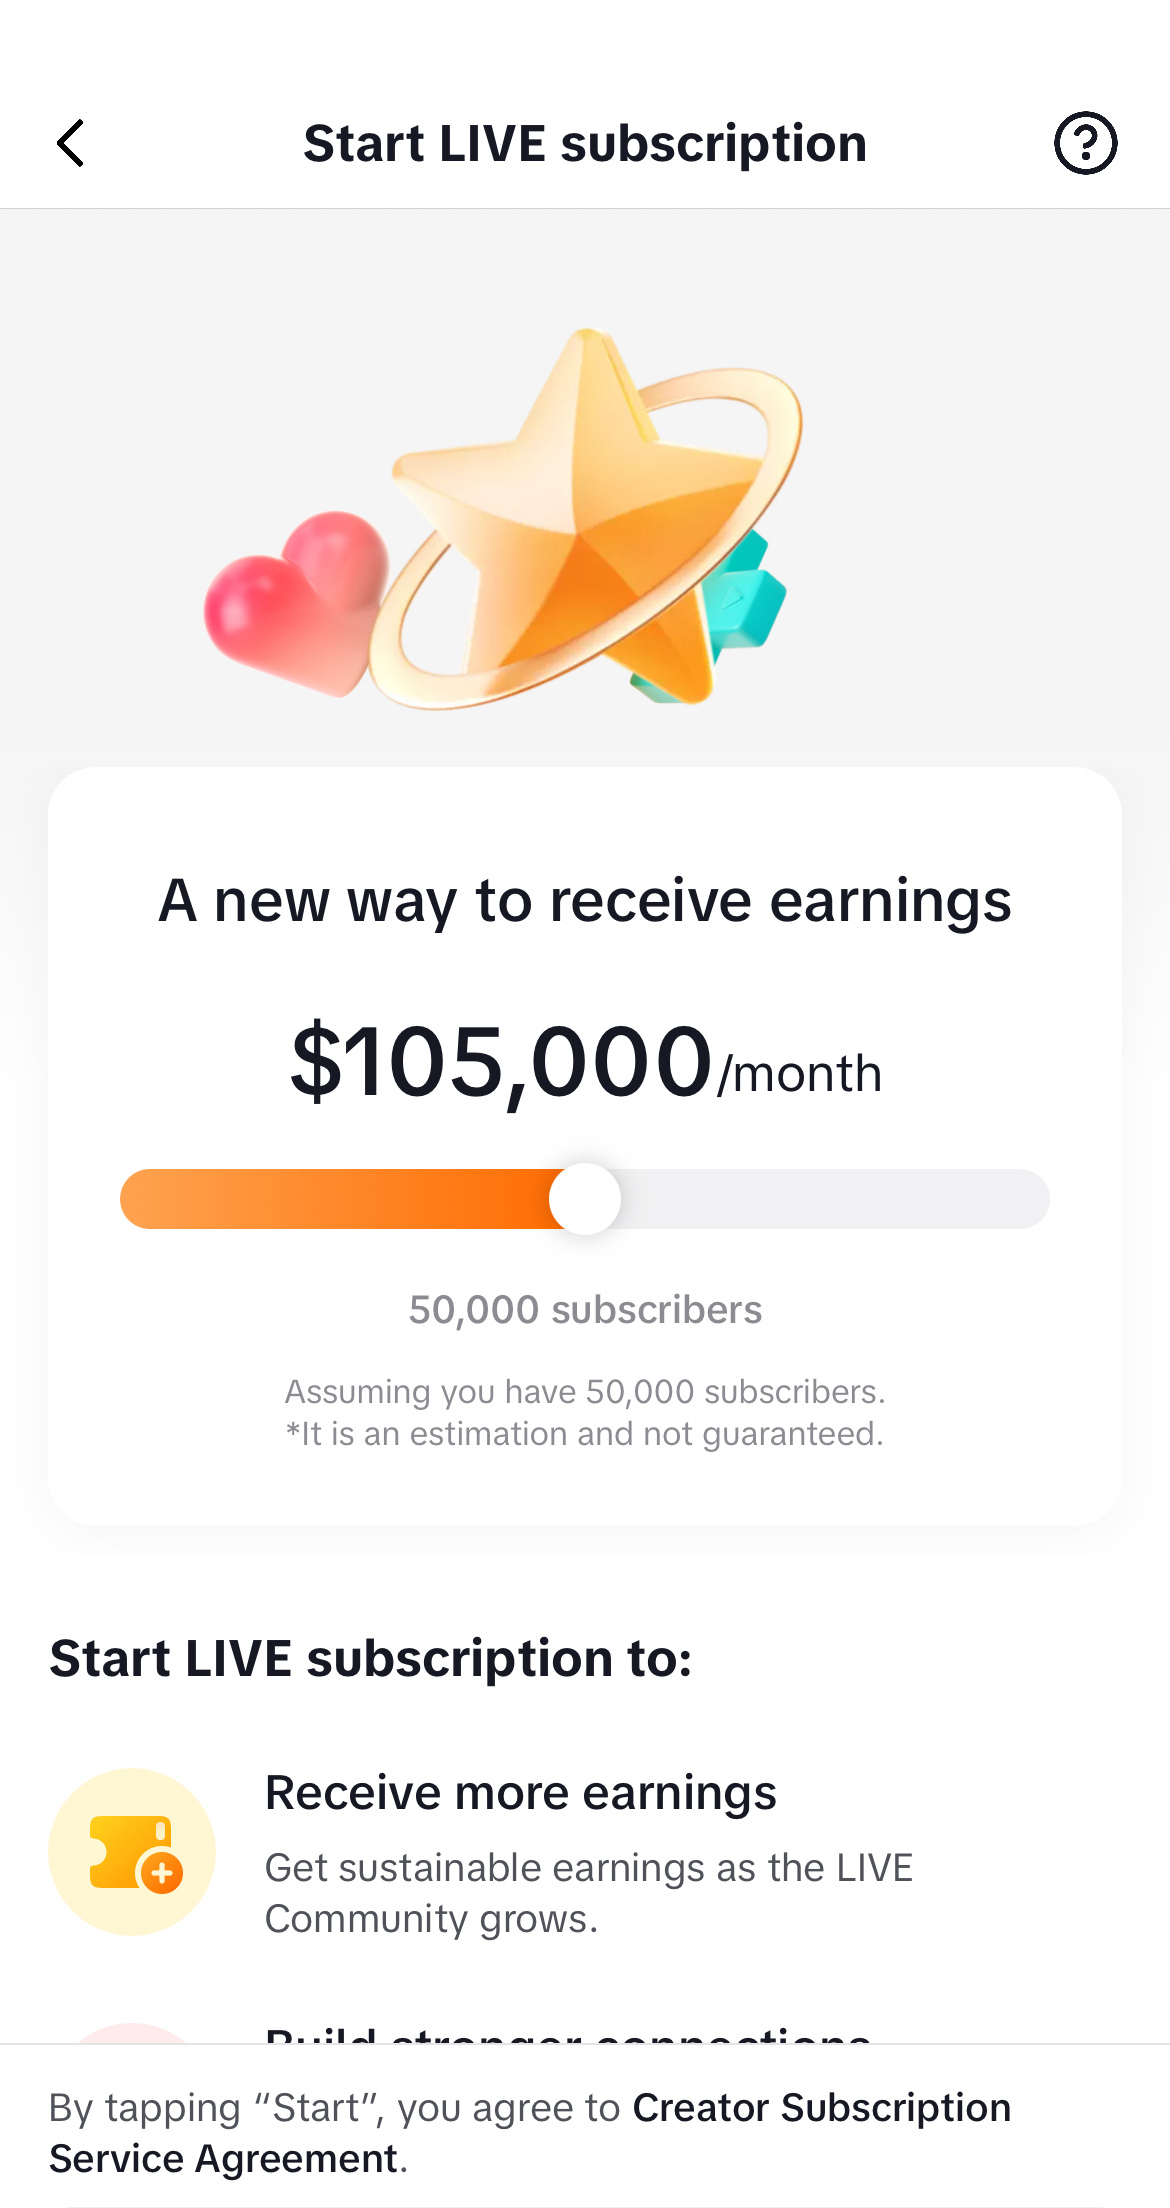 Tiktok saying if you have 50,000 subscribers you’ll get $105,000 a month 